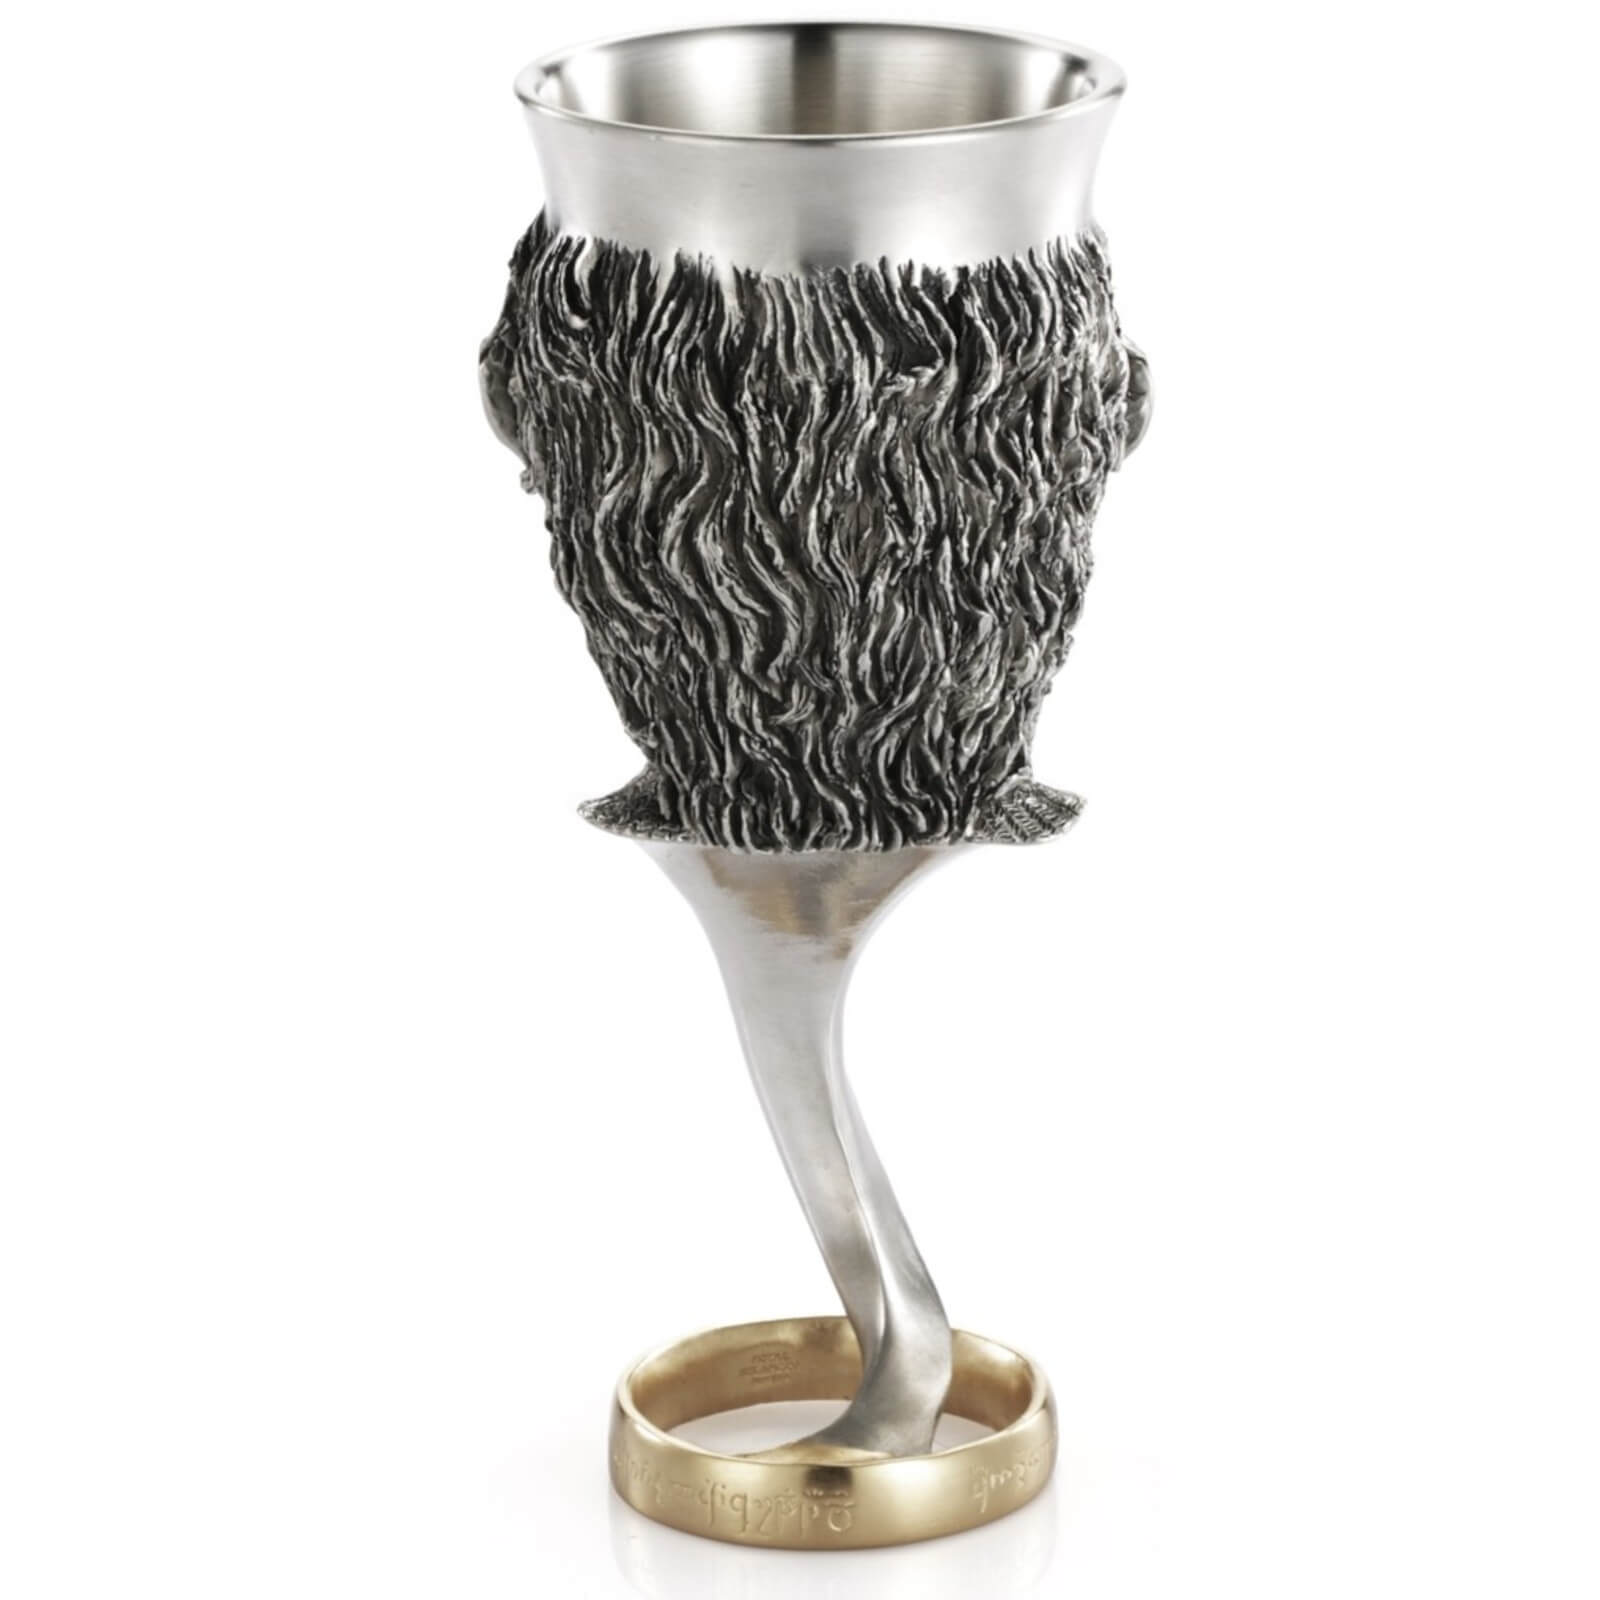 Royal Selangor Lord of the Rings Pewter Goblet - Frodo